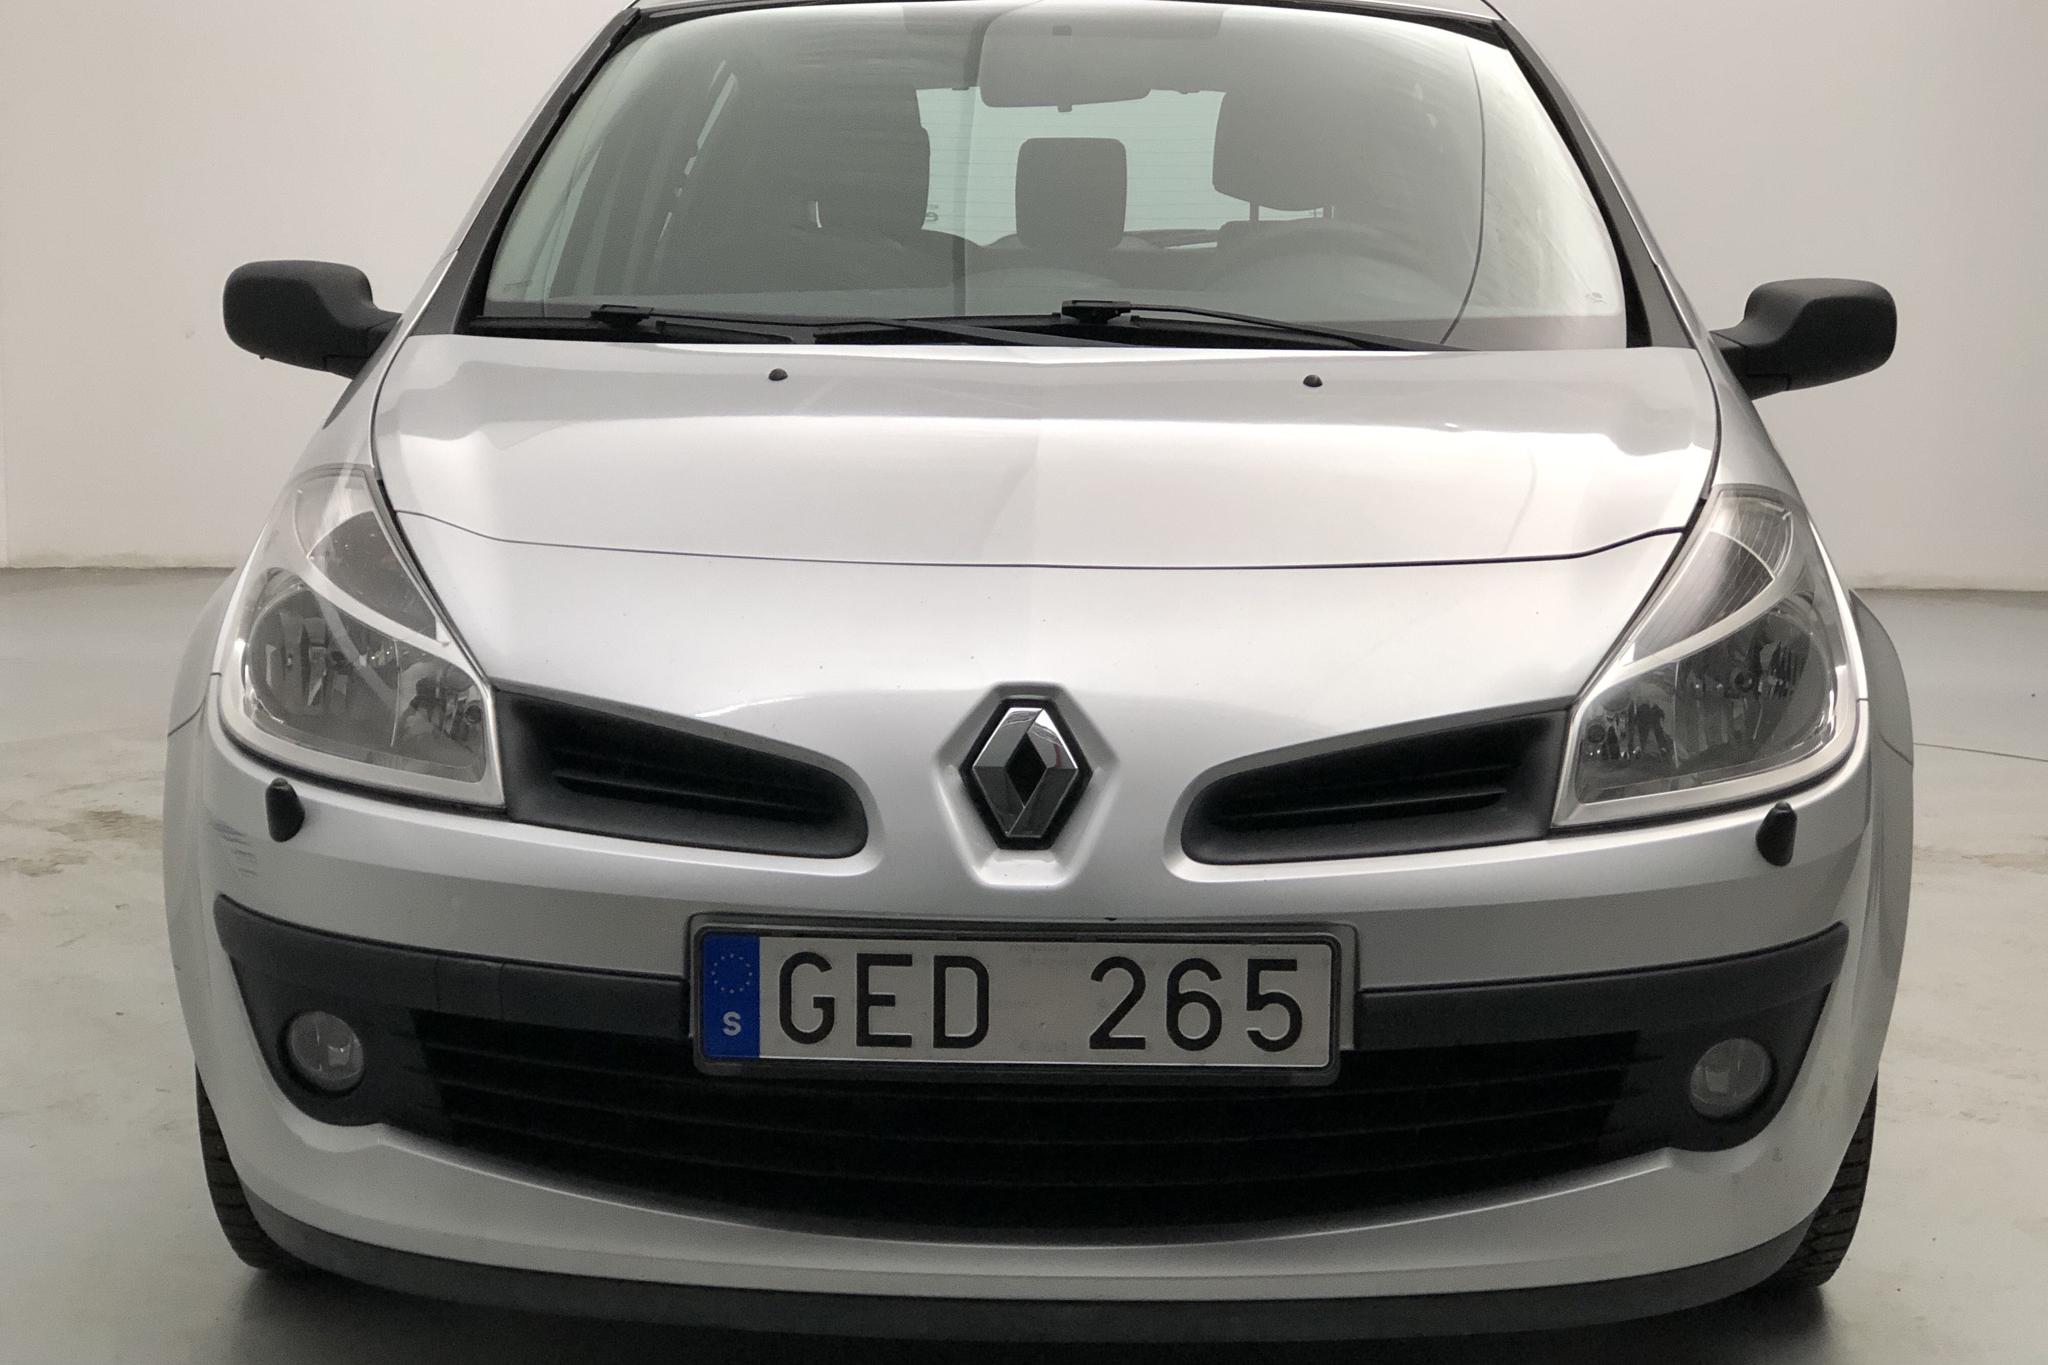 Renault Clio III 1.2 TCE 5dr (101hk) - 12 806 mil - Manuell - Light Grey - 2008